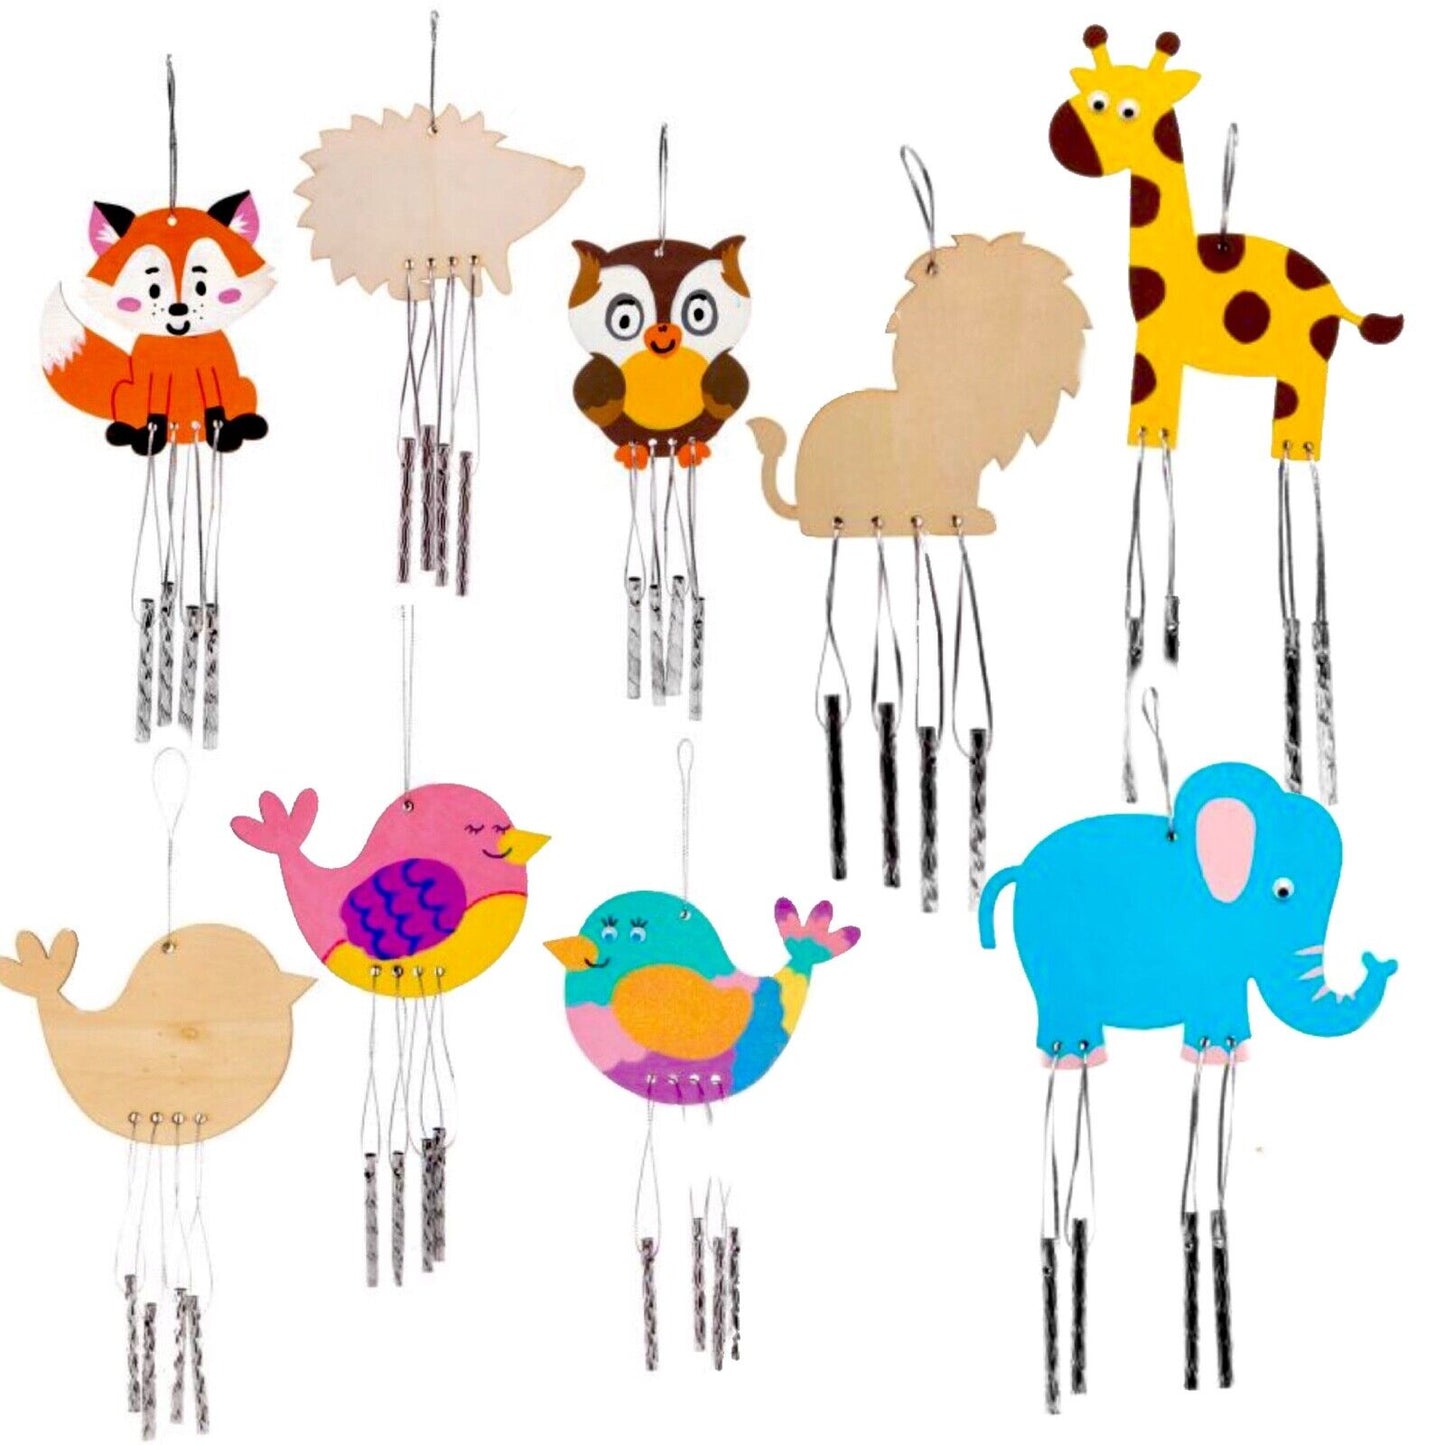 1x Design Your Own Cute Wooden Animals Windchime Kit